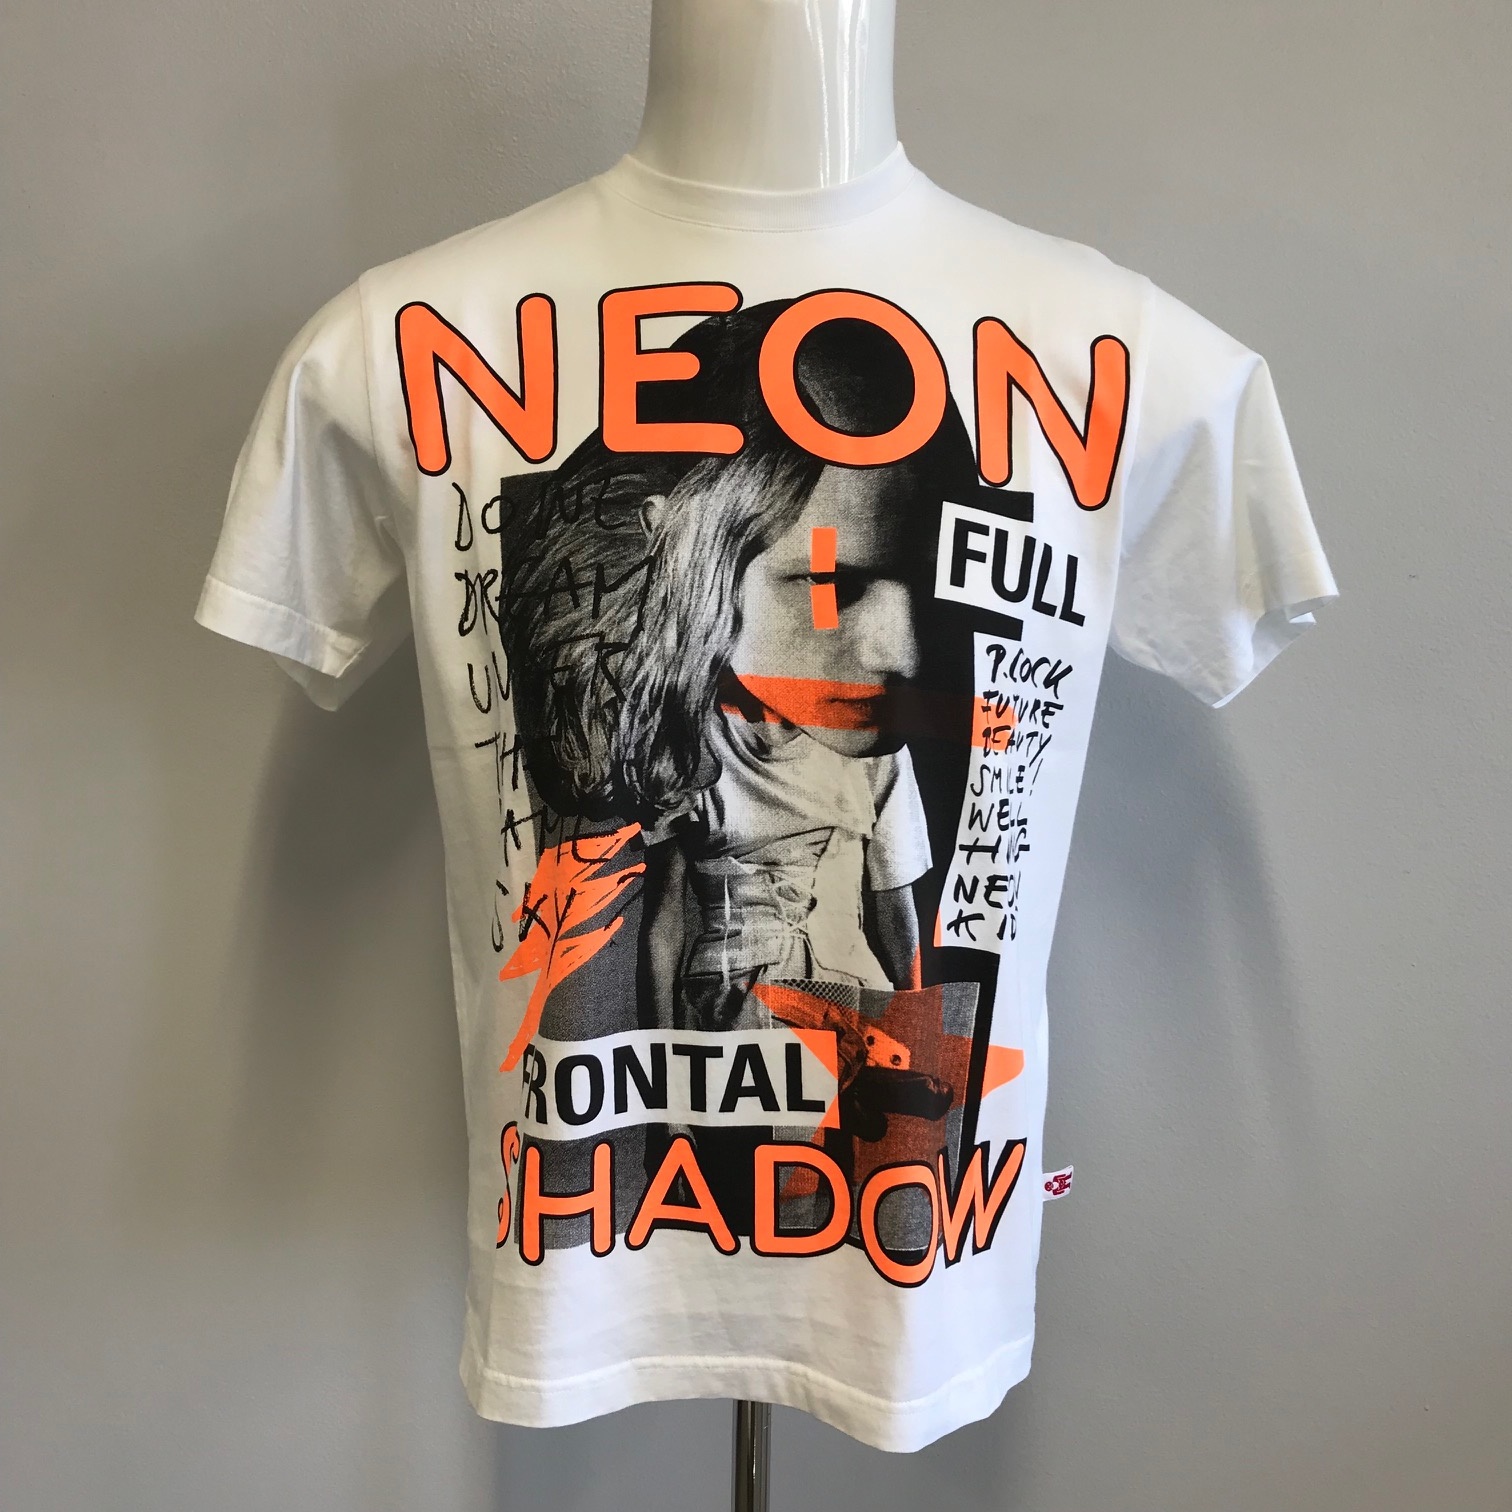 Neon Shadow Coll.- T-Shirt Printed - Please Do Not Enter